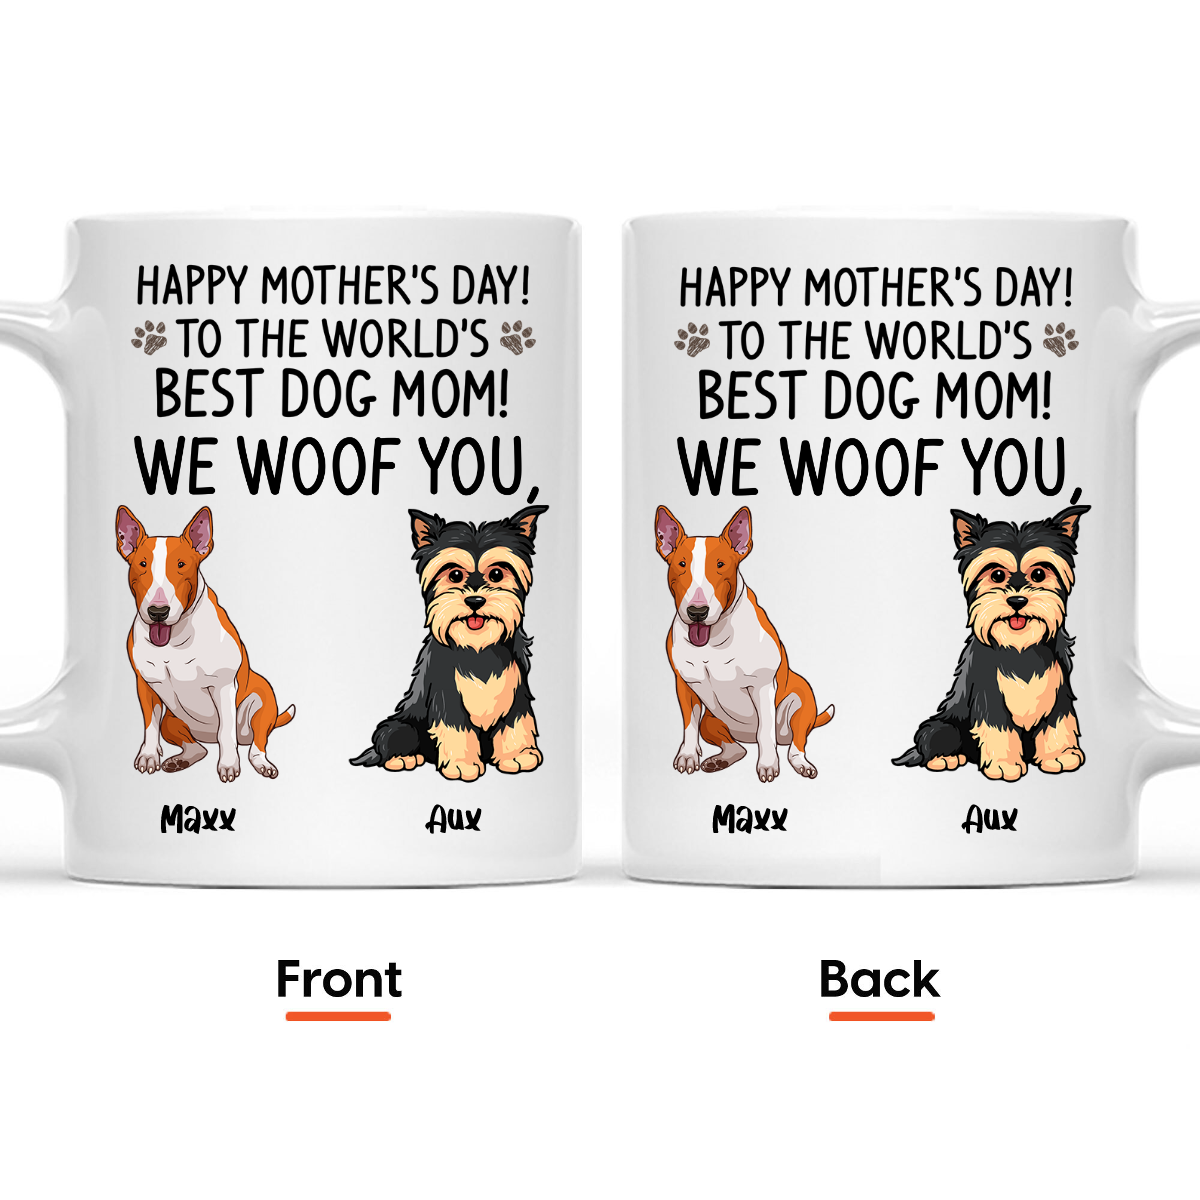 Happy Mother's Day - Personalized Mug for Dog Lovers